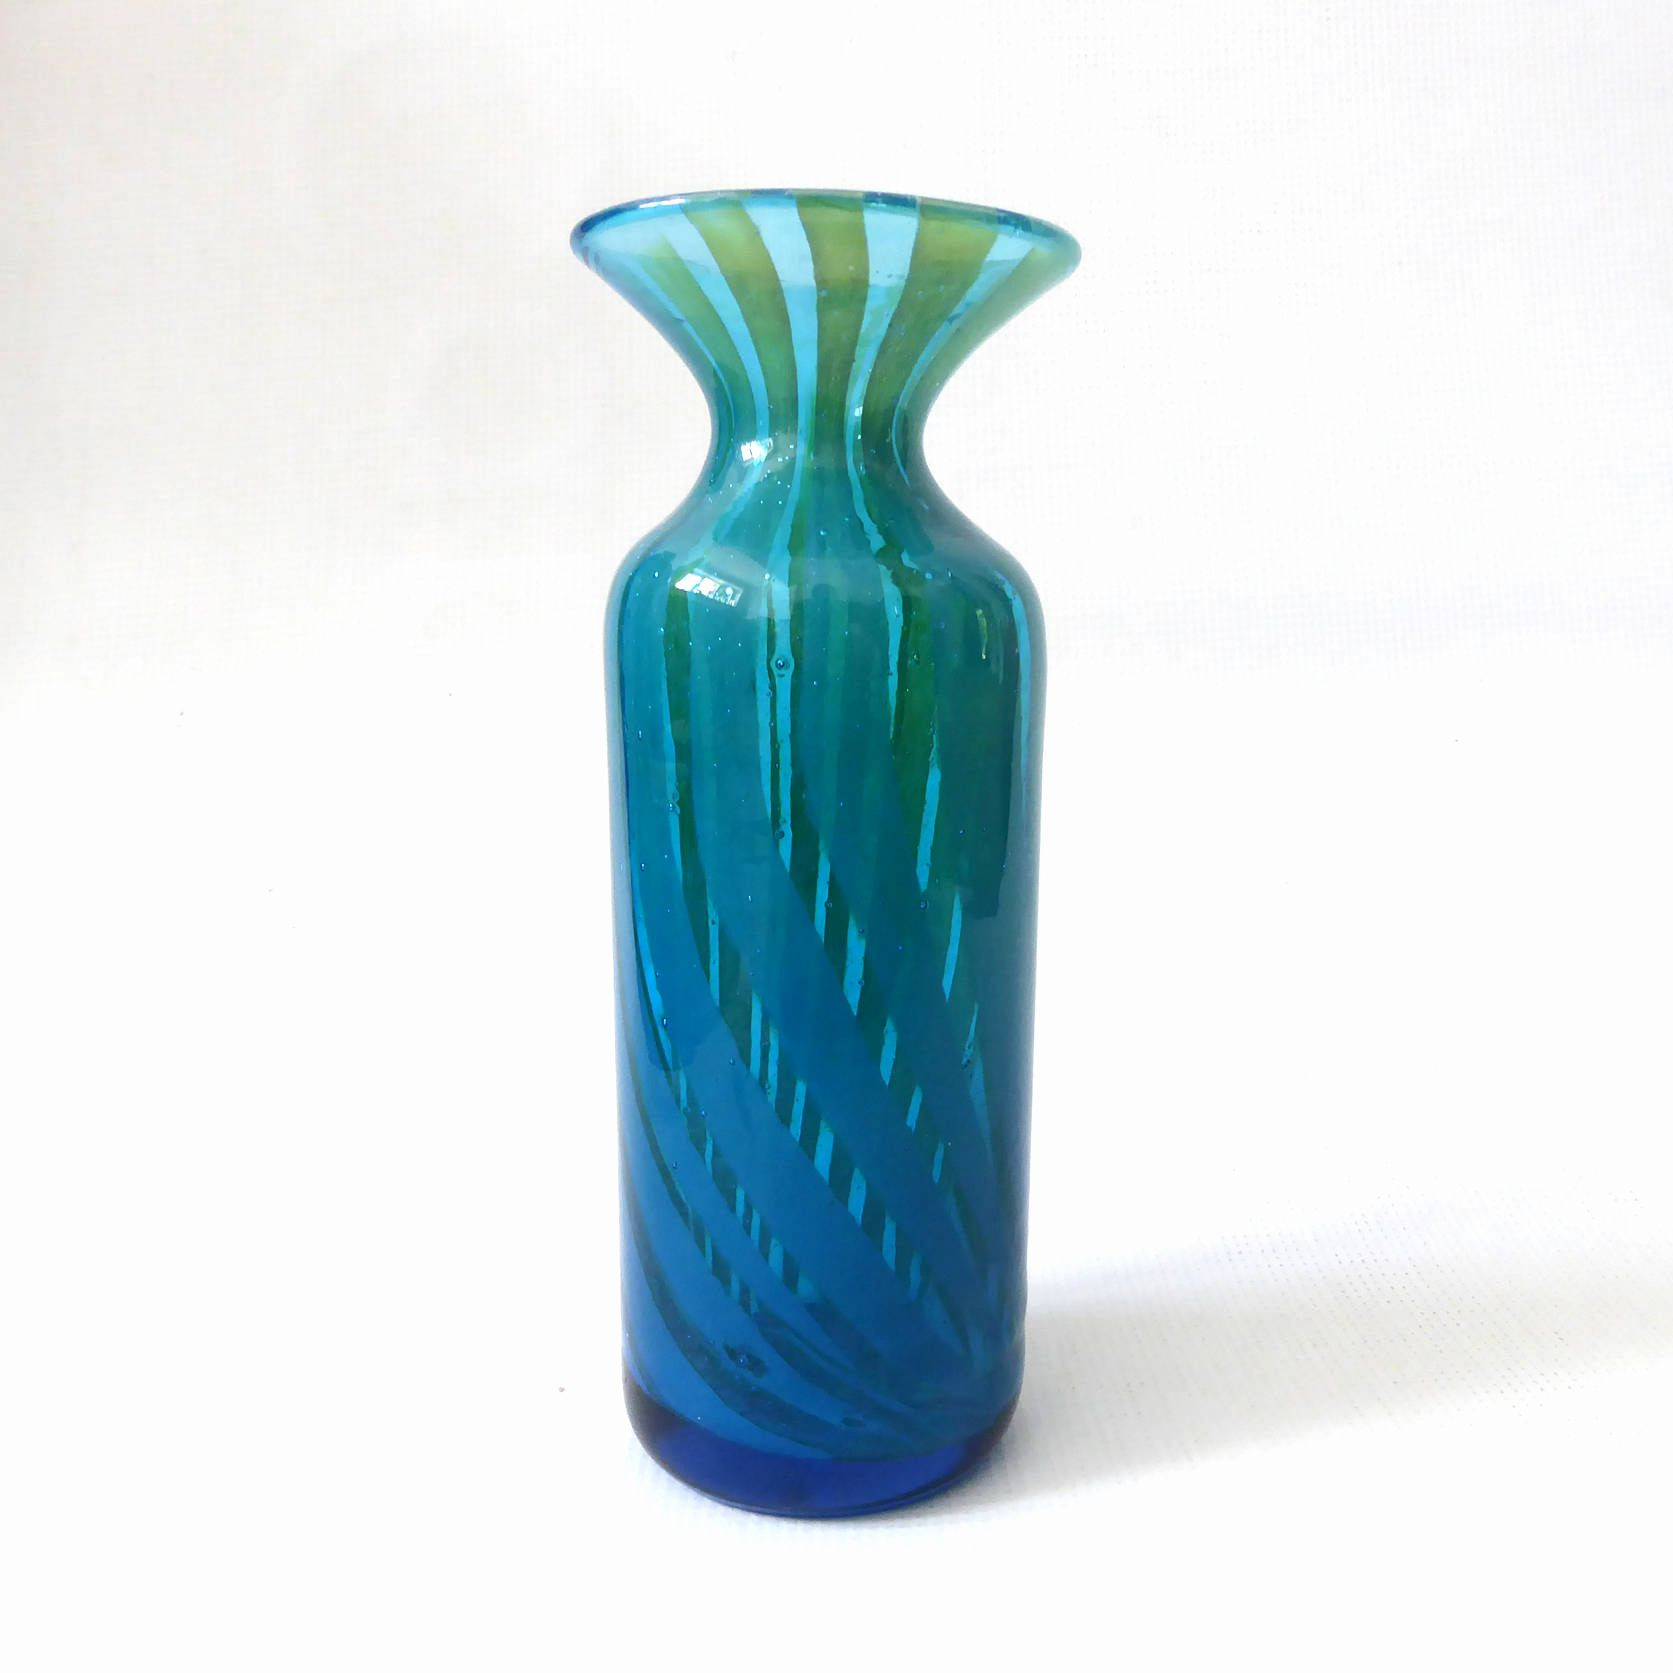 28 Stunning Blue Square Glass Vase 2024 free download blue square glass vase of 35 antique green glass vases the weekly world for antique glass vases identify vase and cellar image avorcor